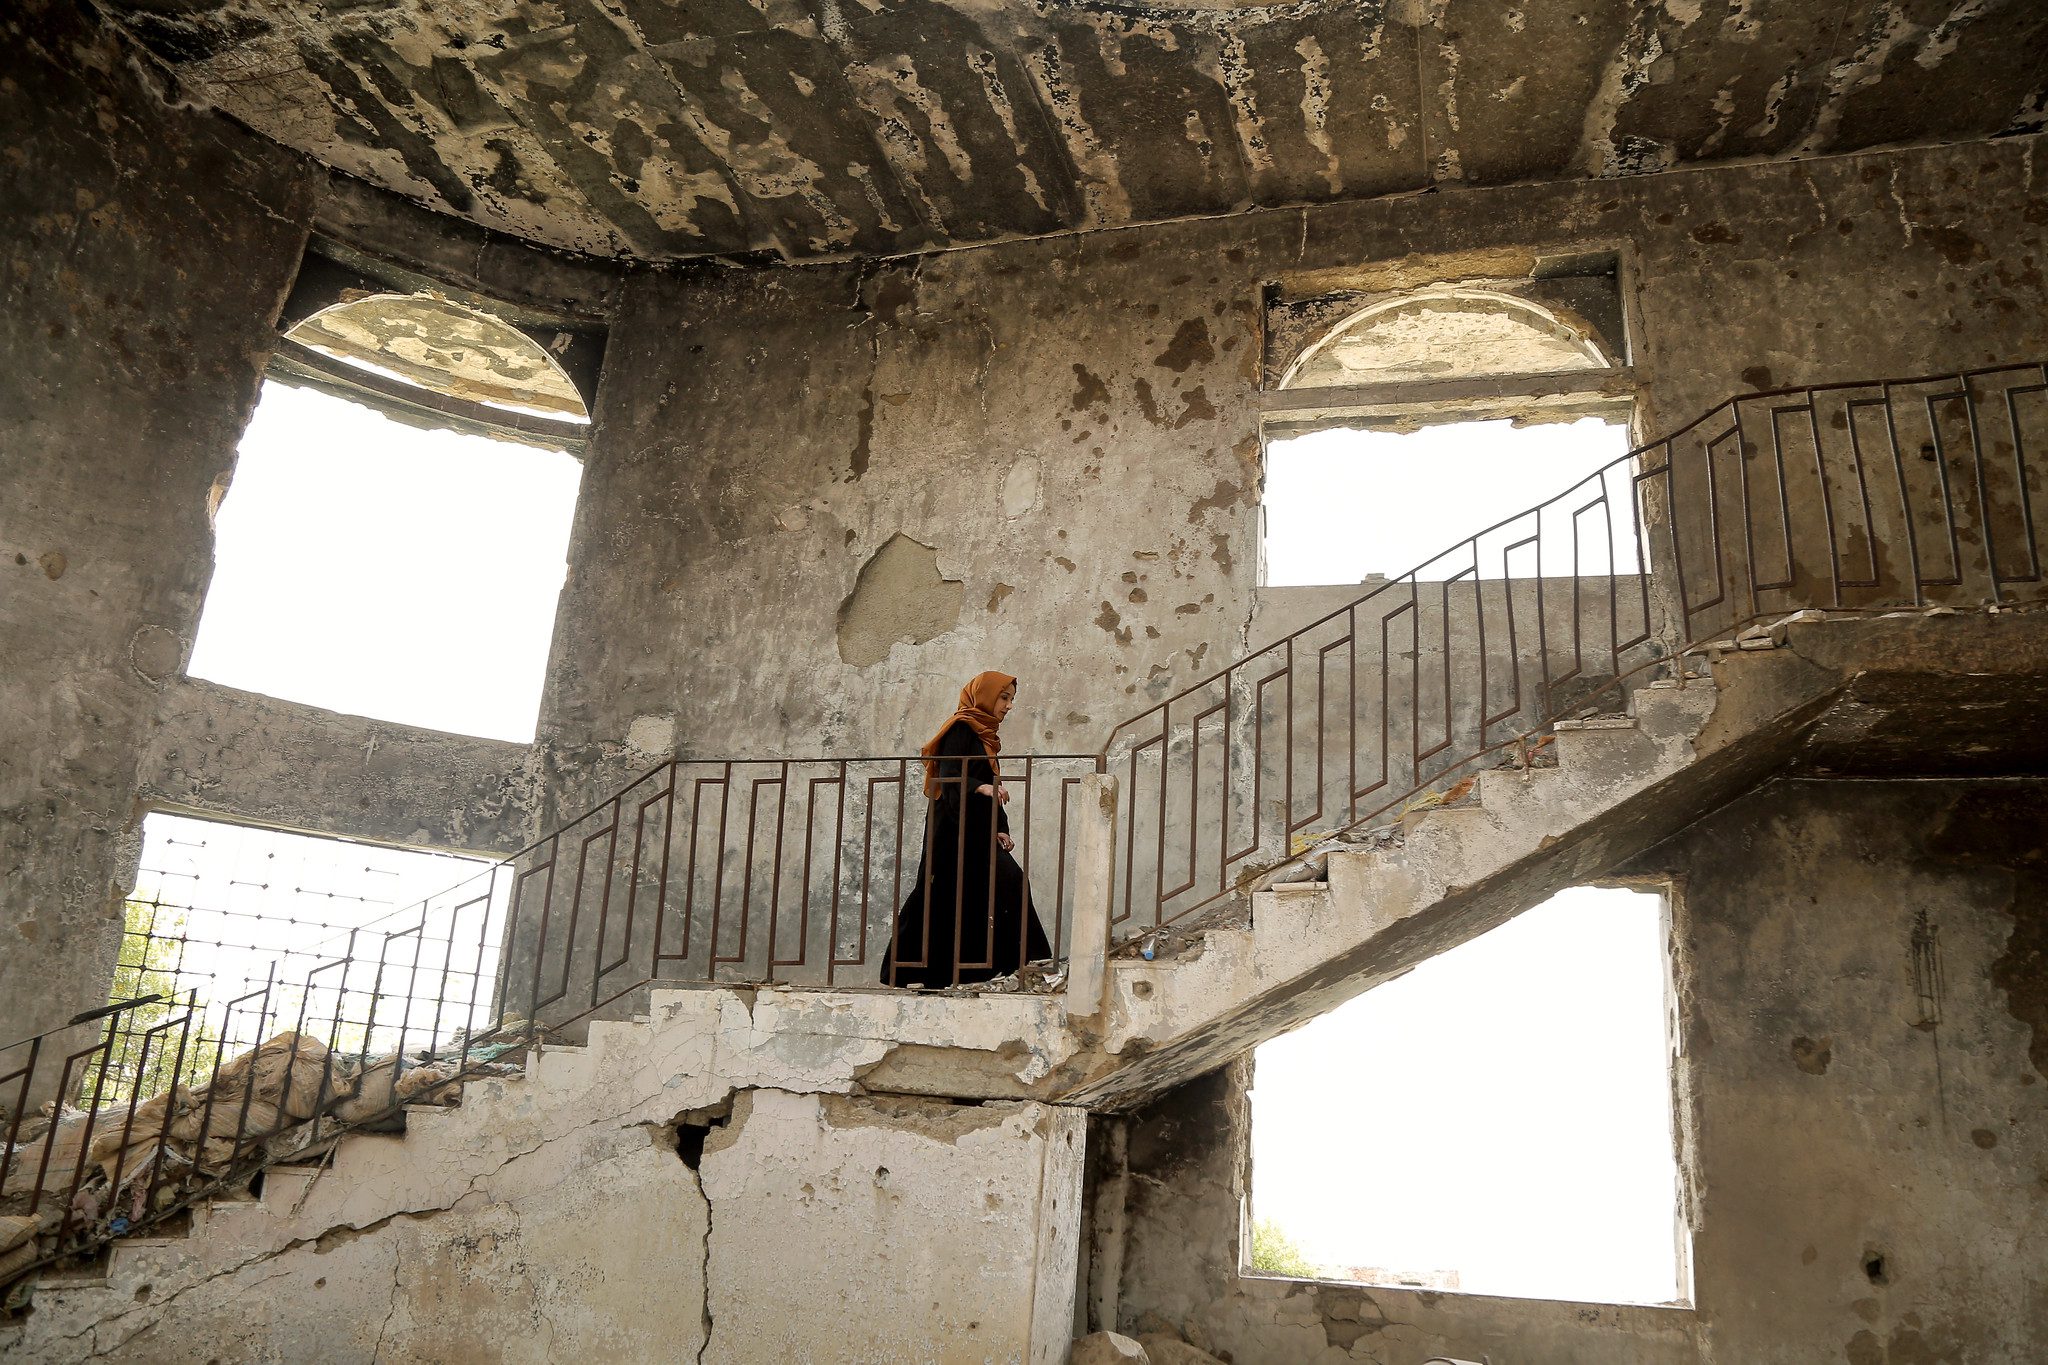 A woman climbing stairs in an old structure.